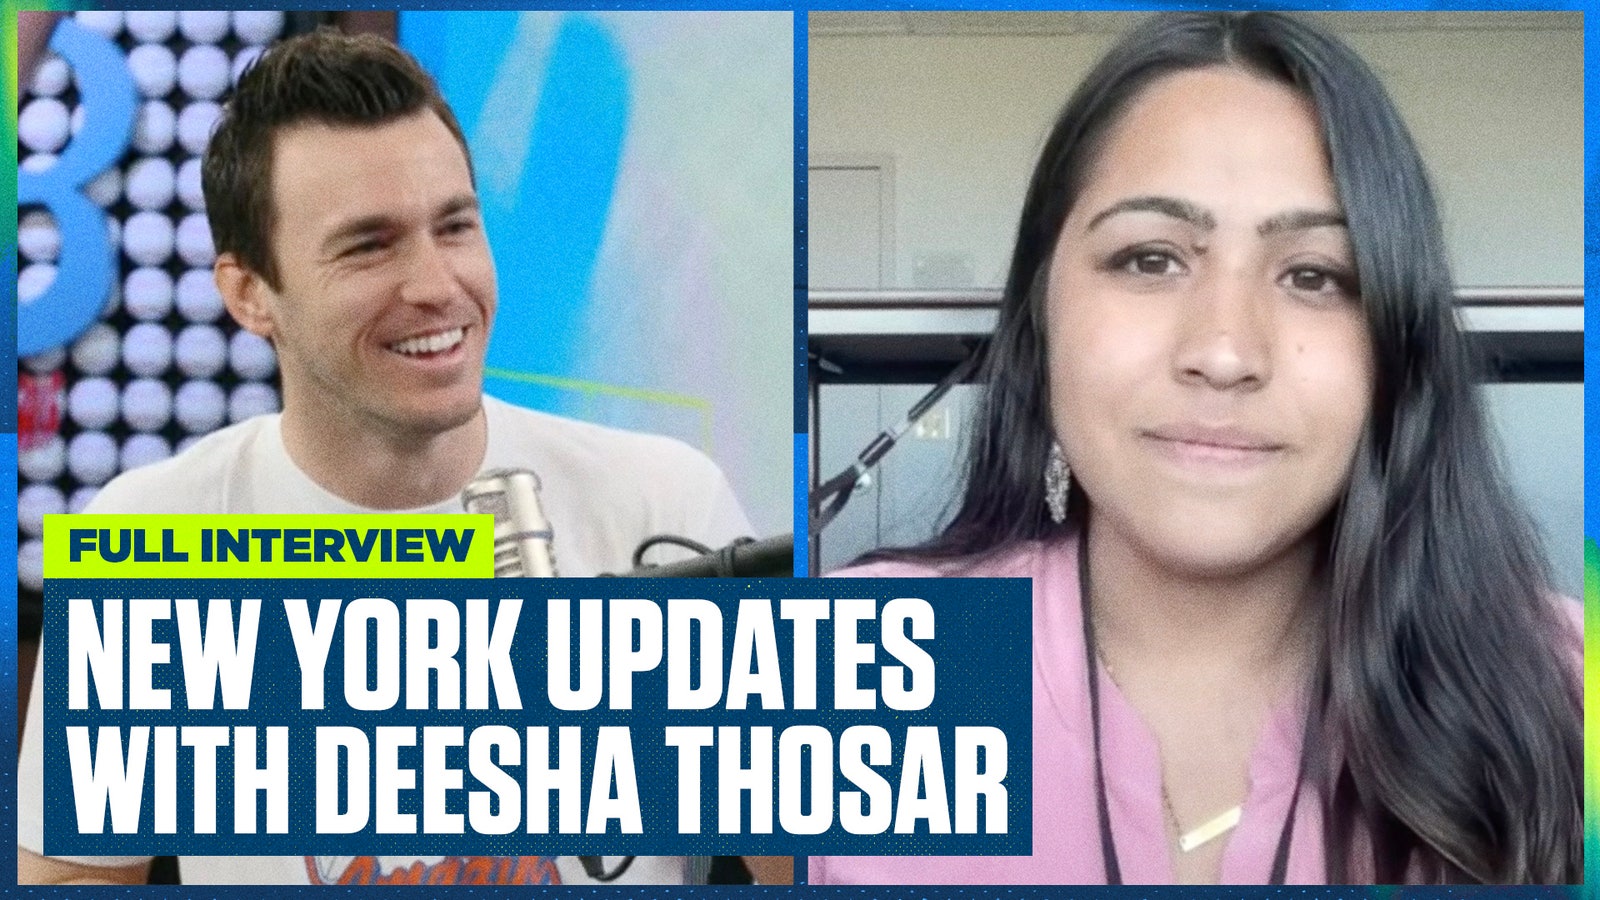 Yankees and Mets spring training updates with Deesha Thosar